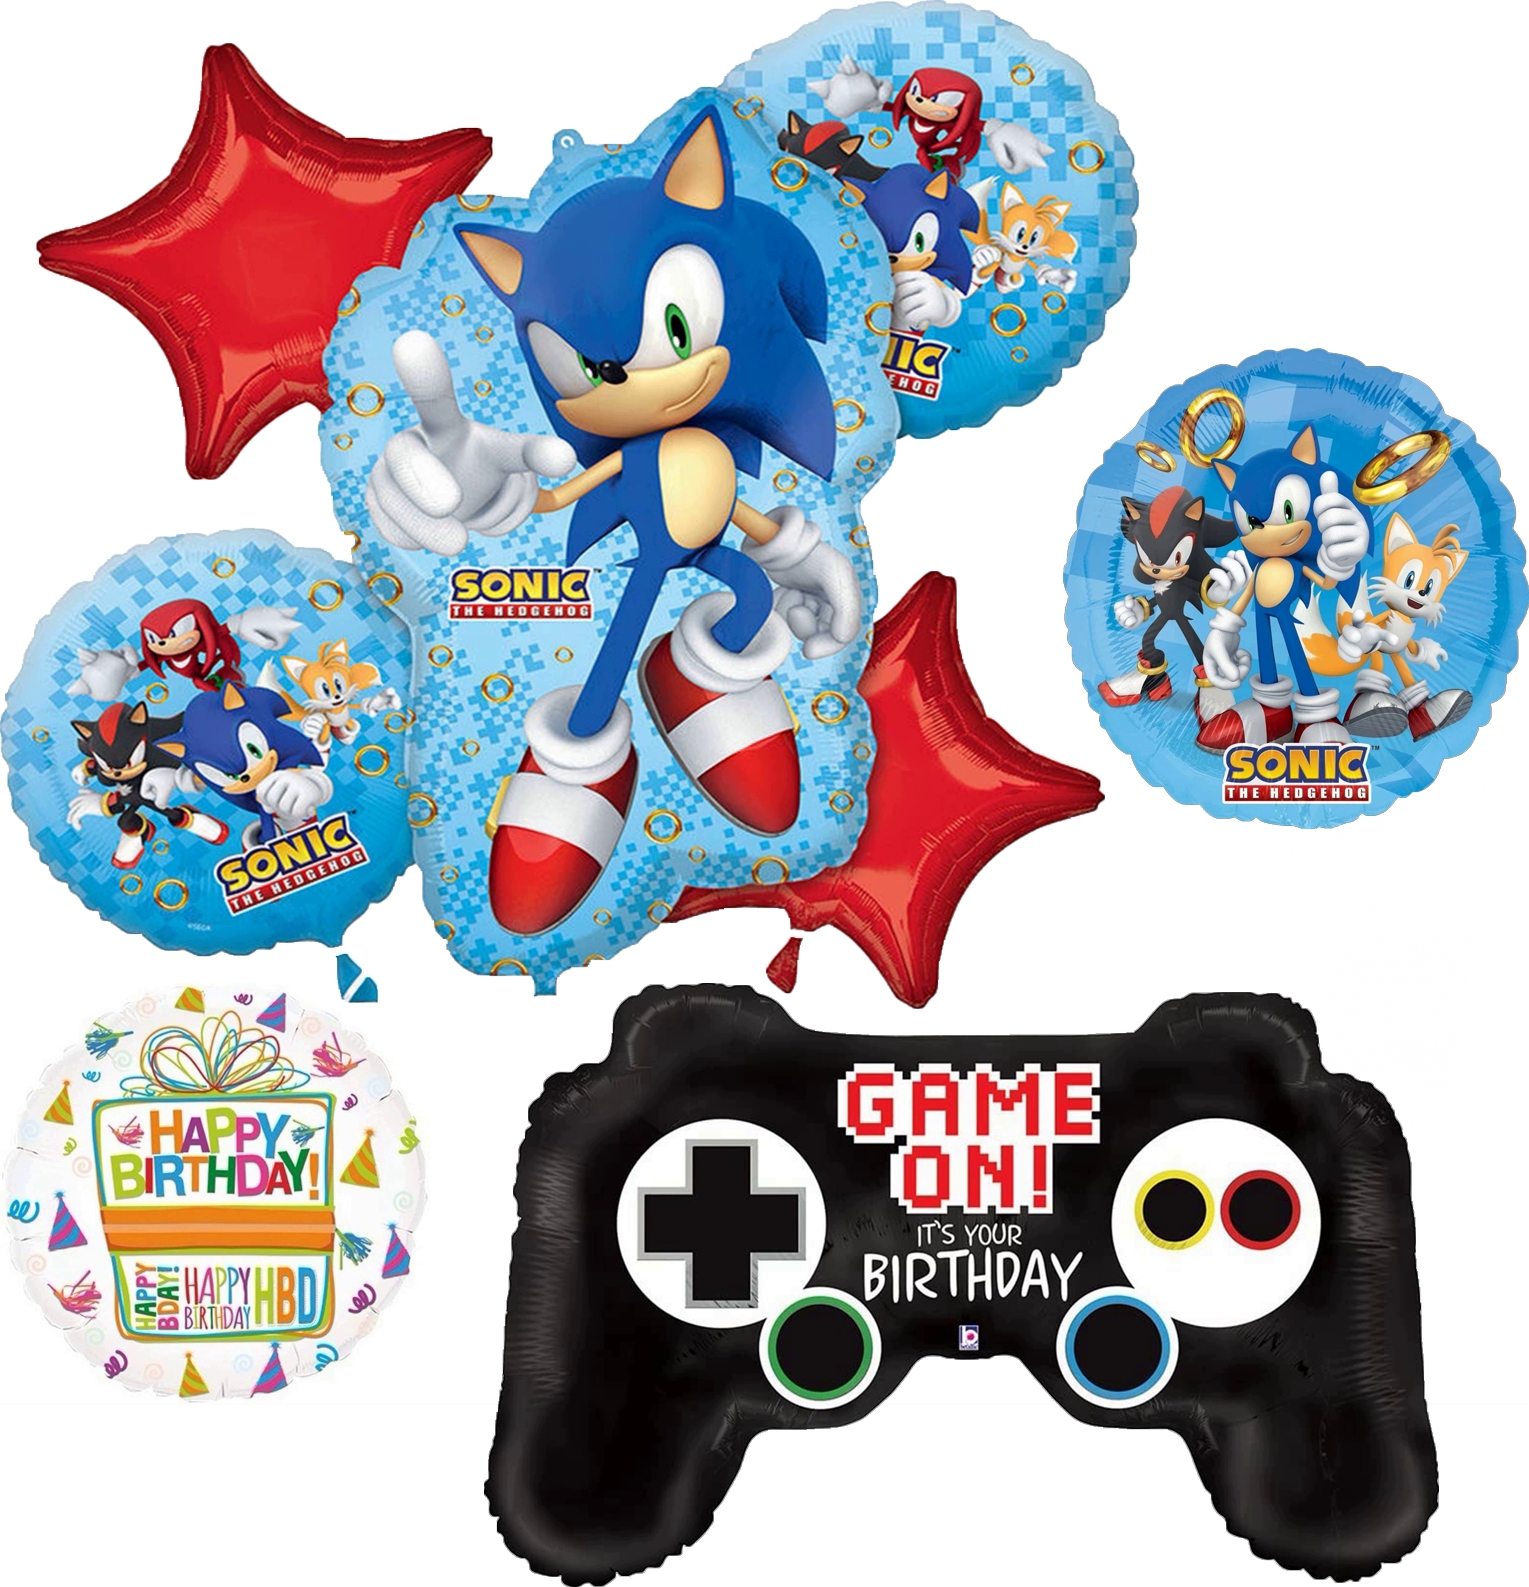 The Ultimate Sonic The Hedgehog Birthday Party Supplies Balloon Bouquet  Decorations